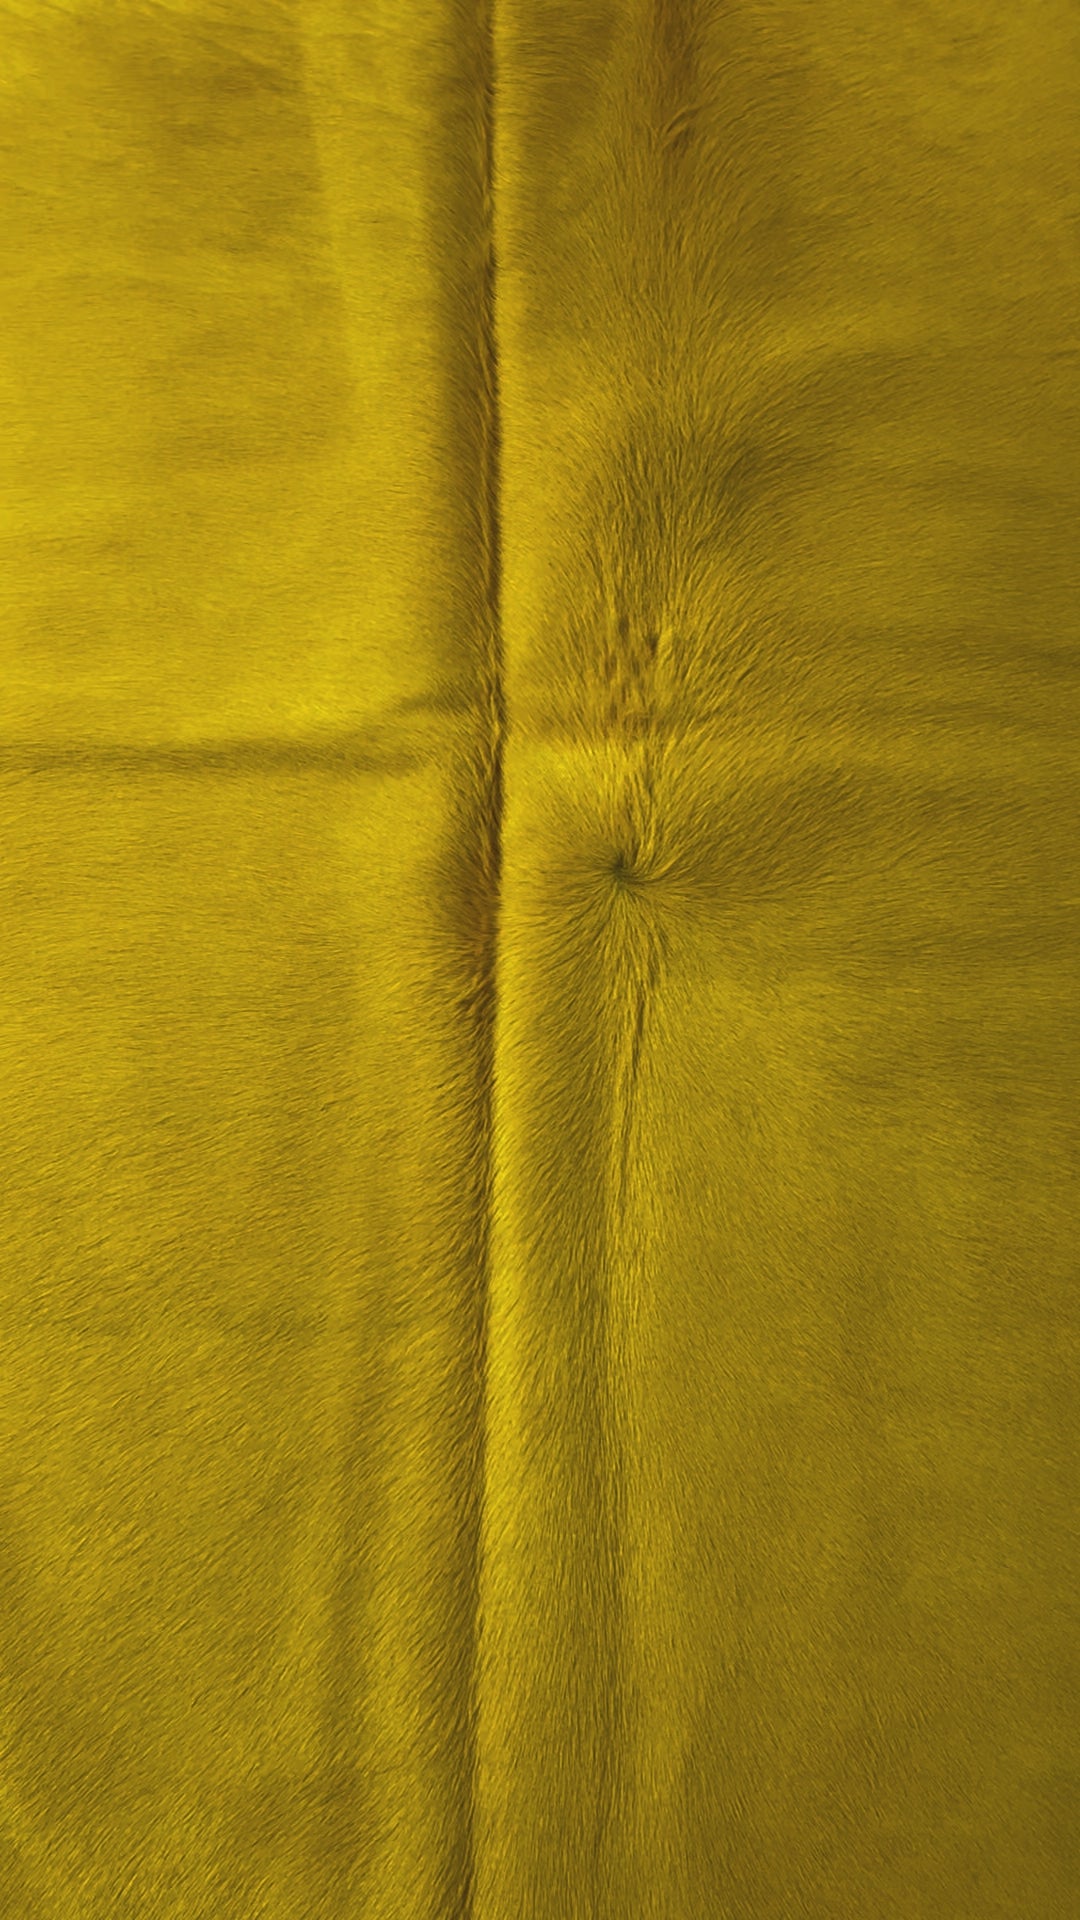 Dyed Yellow Cowhide Rug Size: 6x6.5 feet D-300